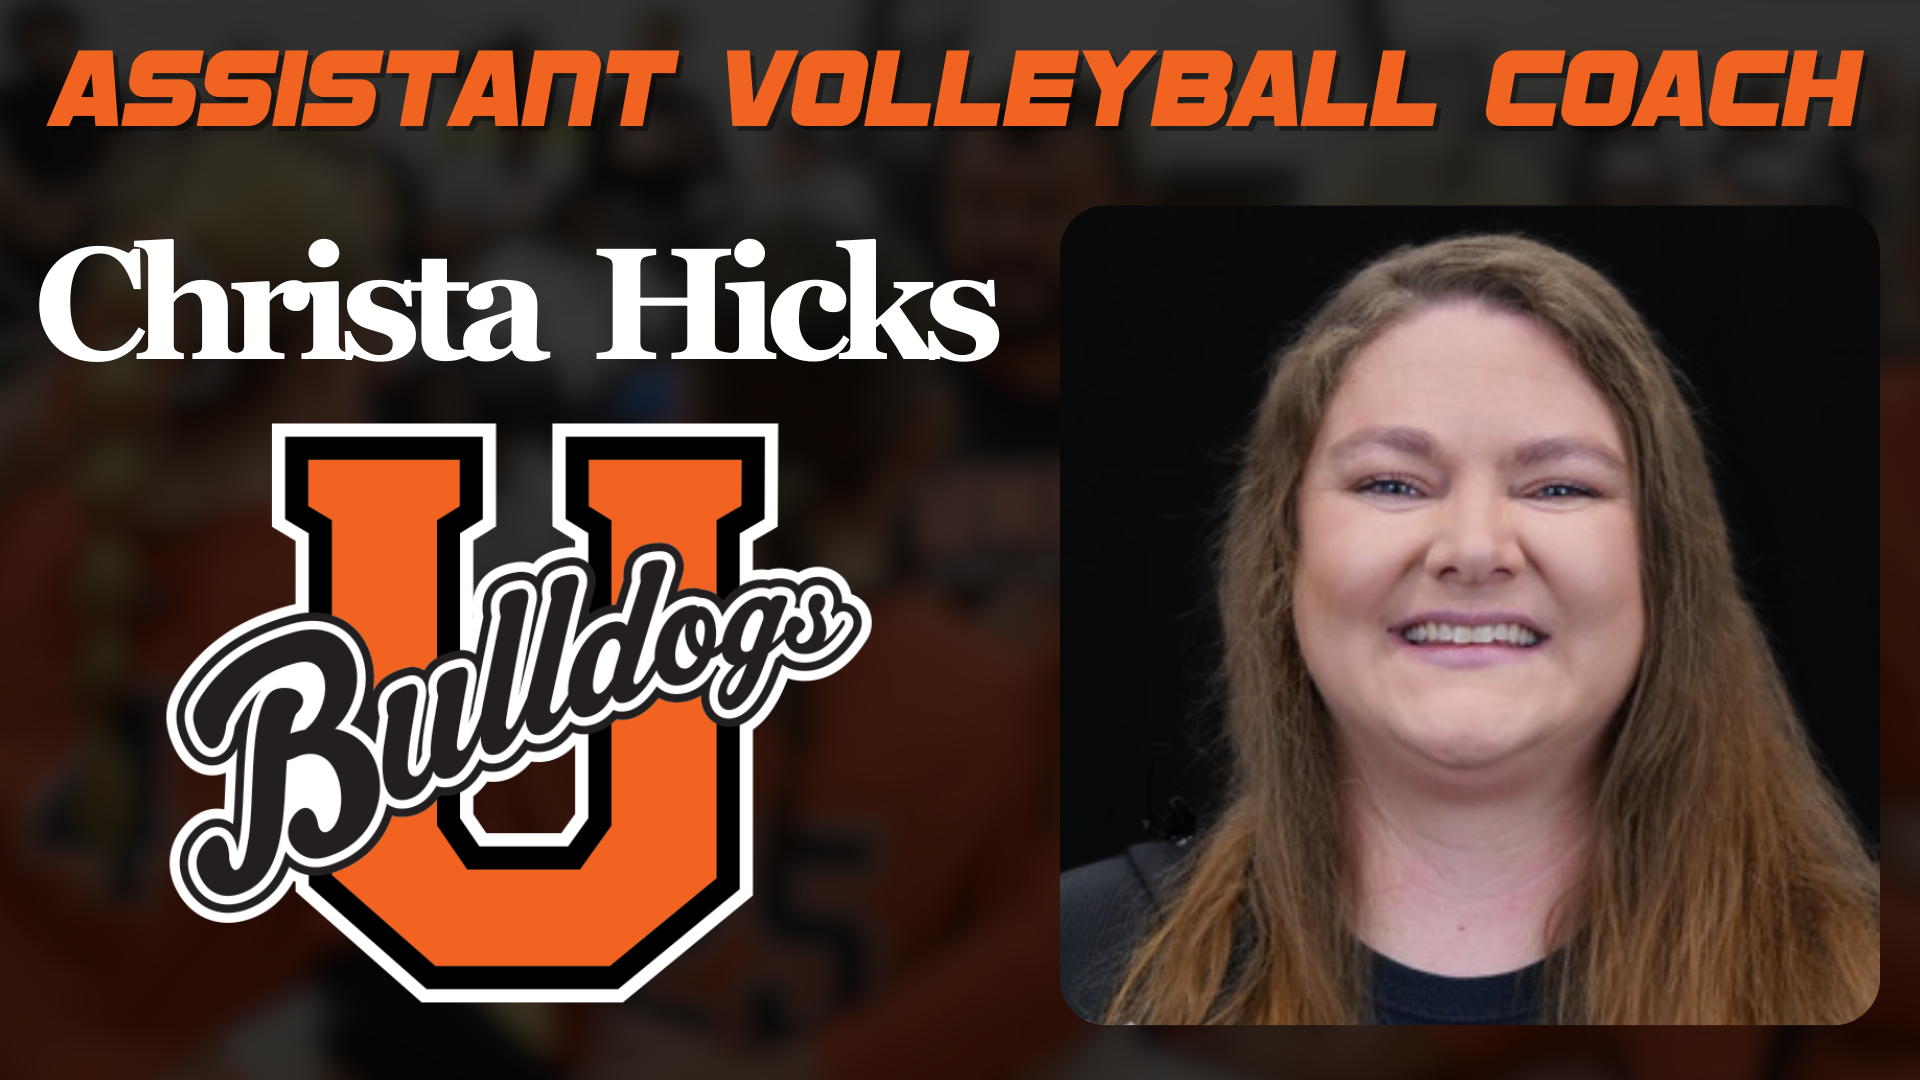 Christa Hicks named Union’s assistant volleyball coach